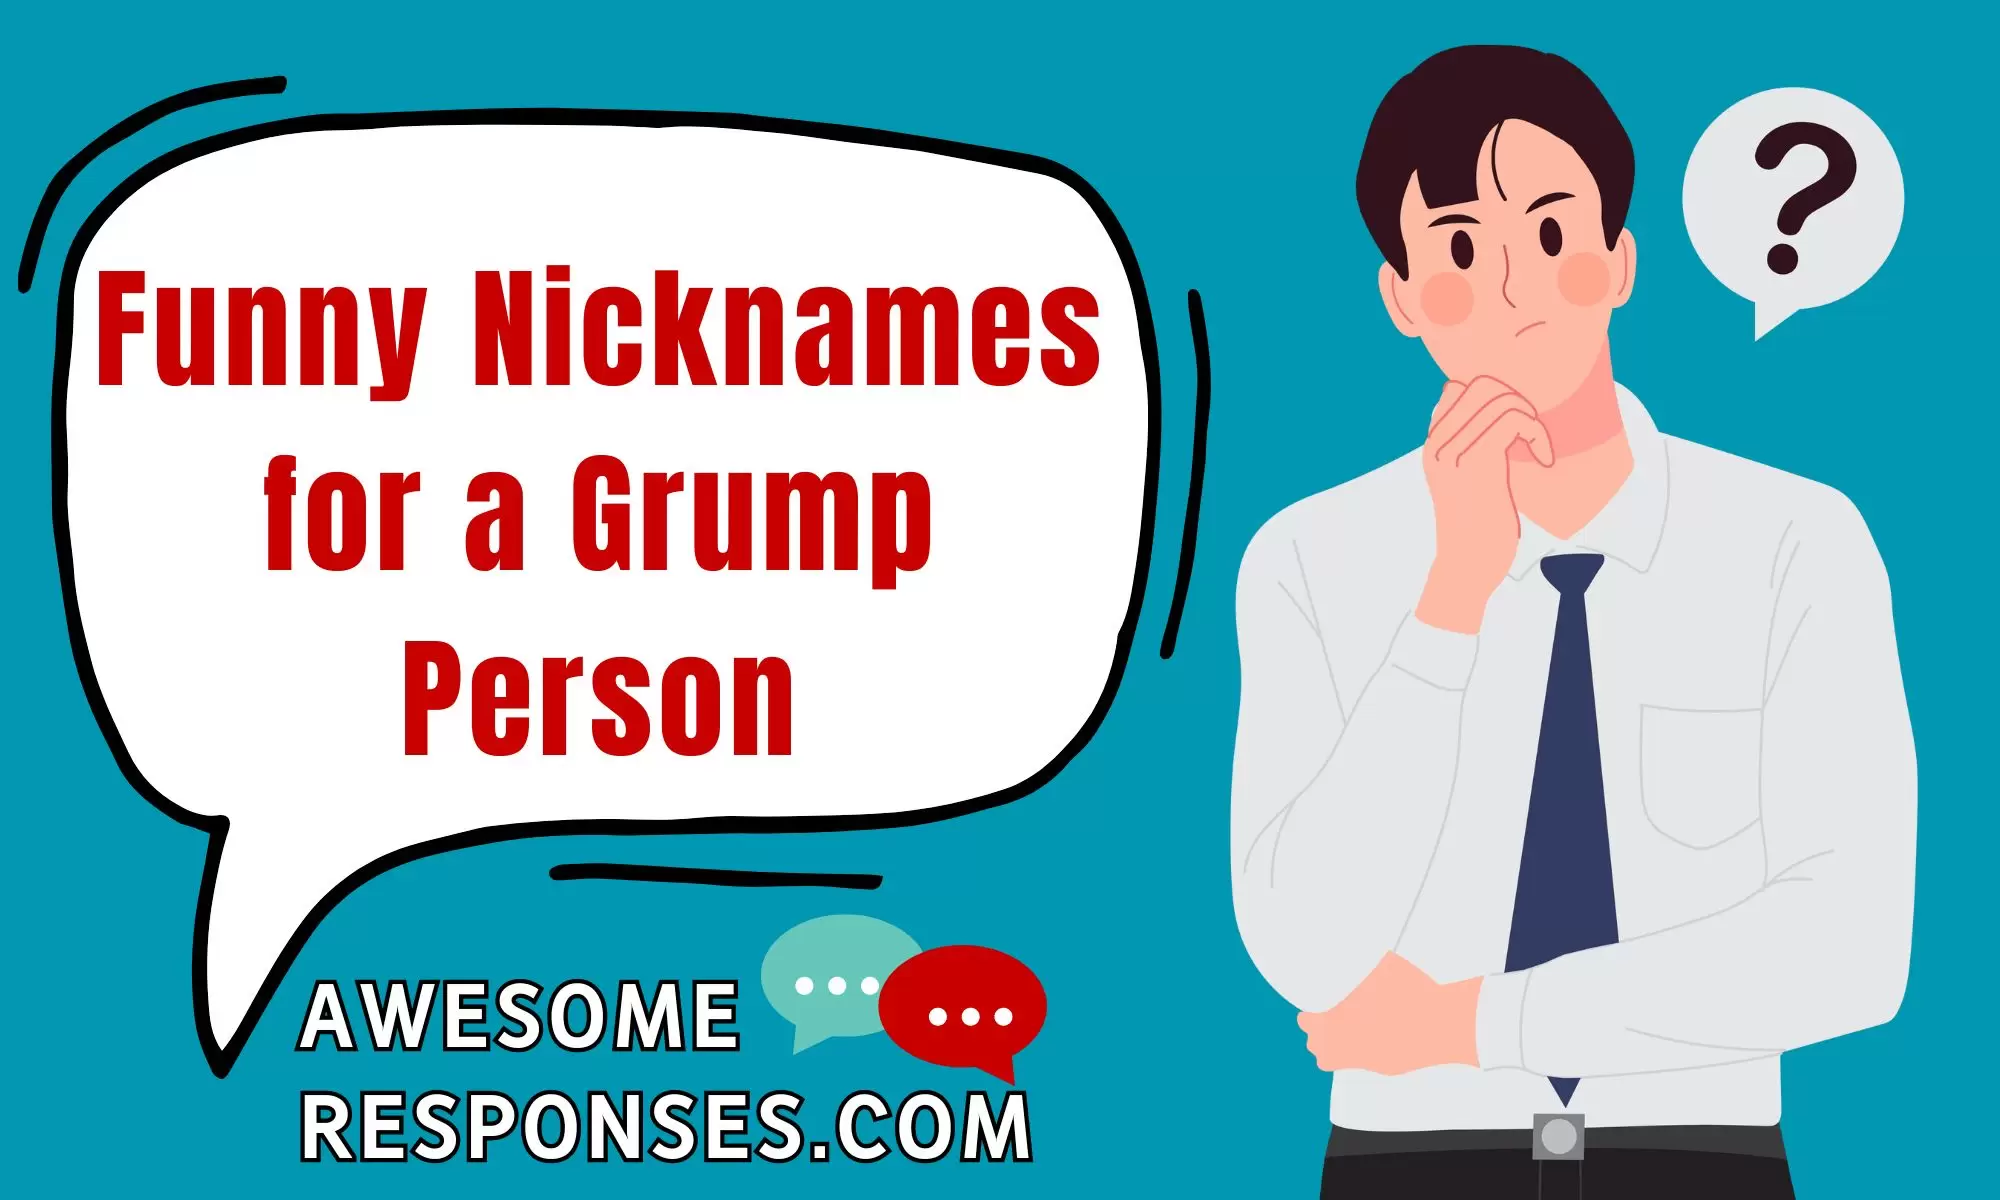 Funny Nicknames for a Grump Person